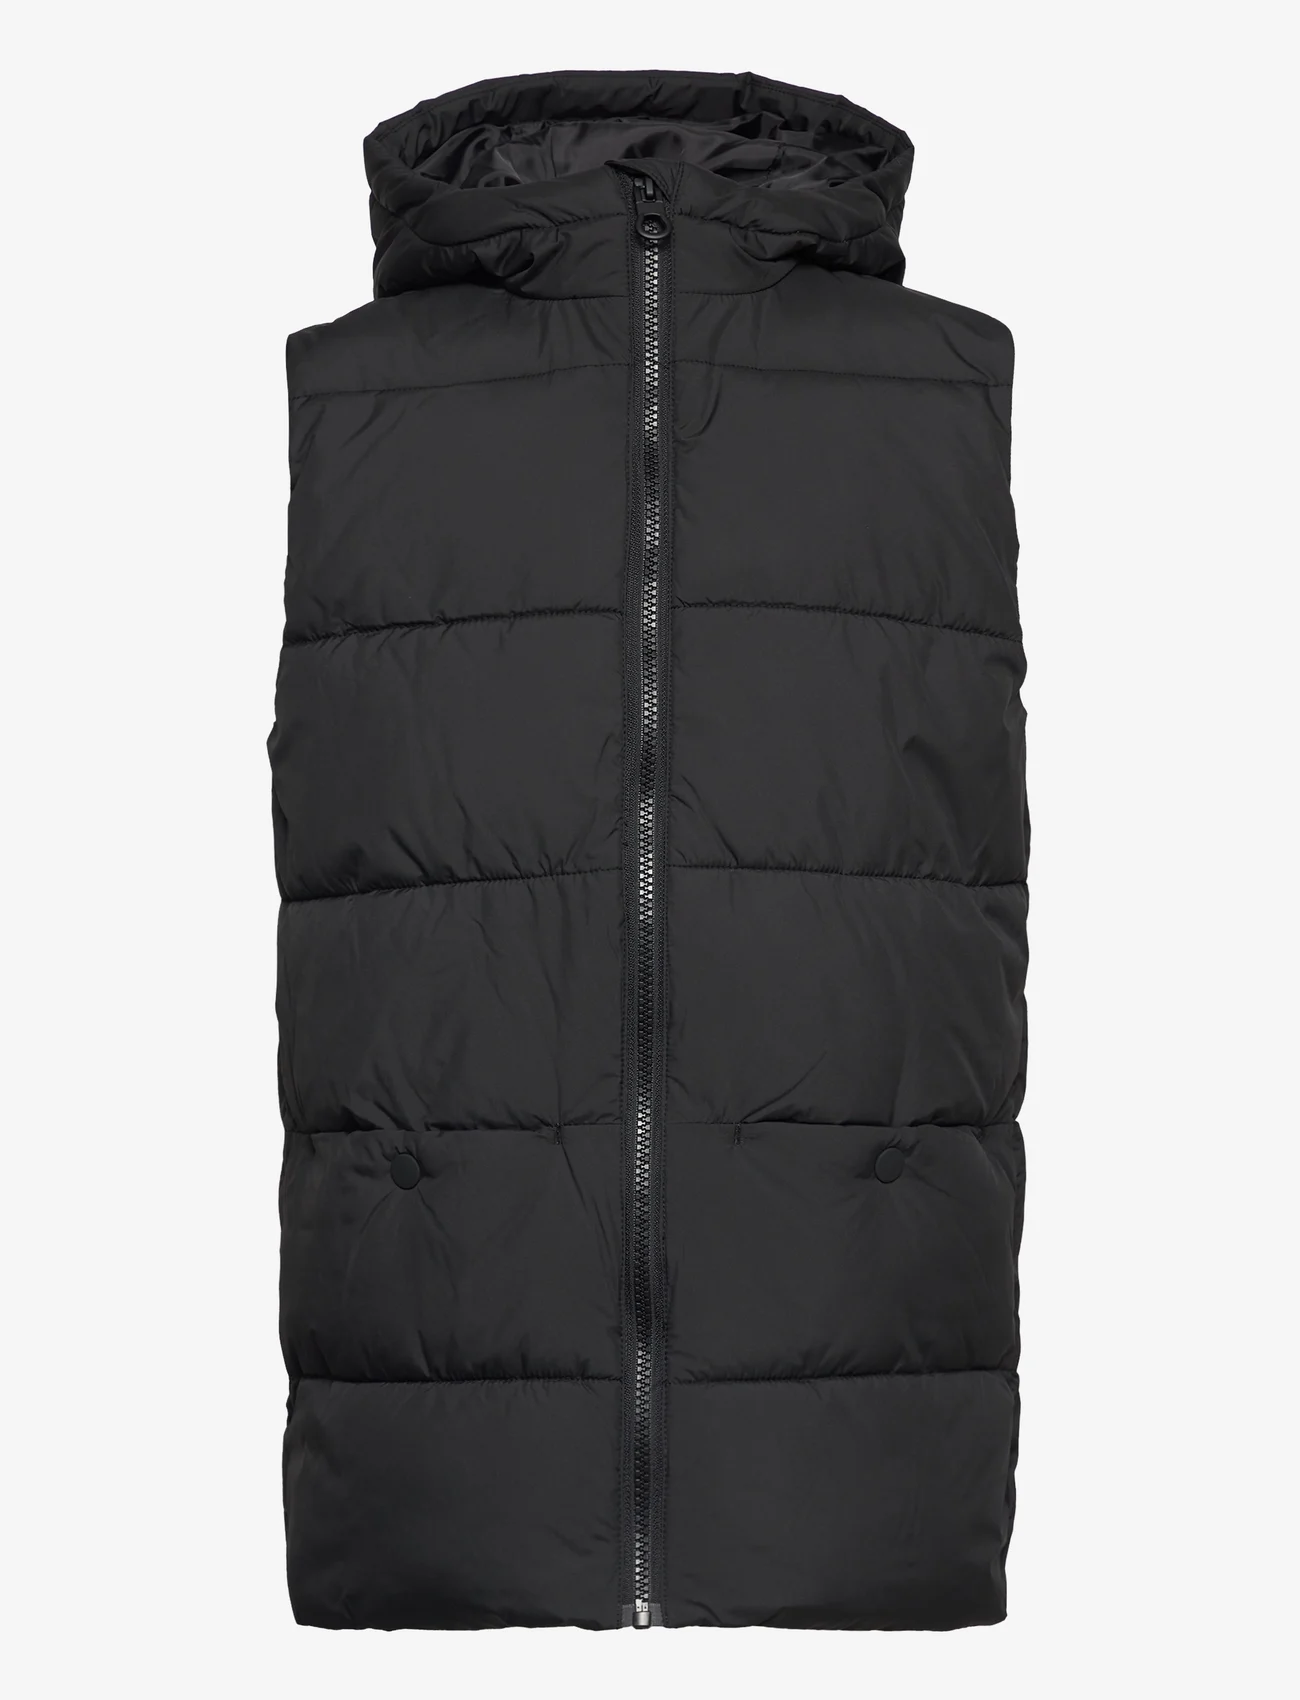 Tom Tailor - Hooded quilted vest - lapsed - black - 0